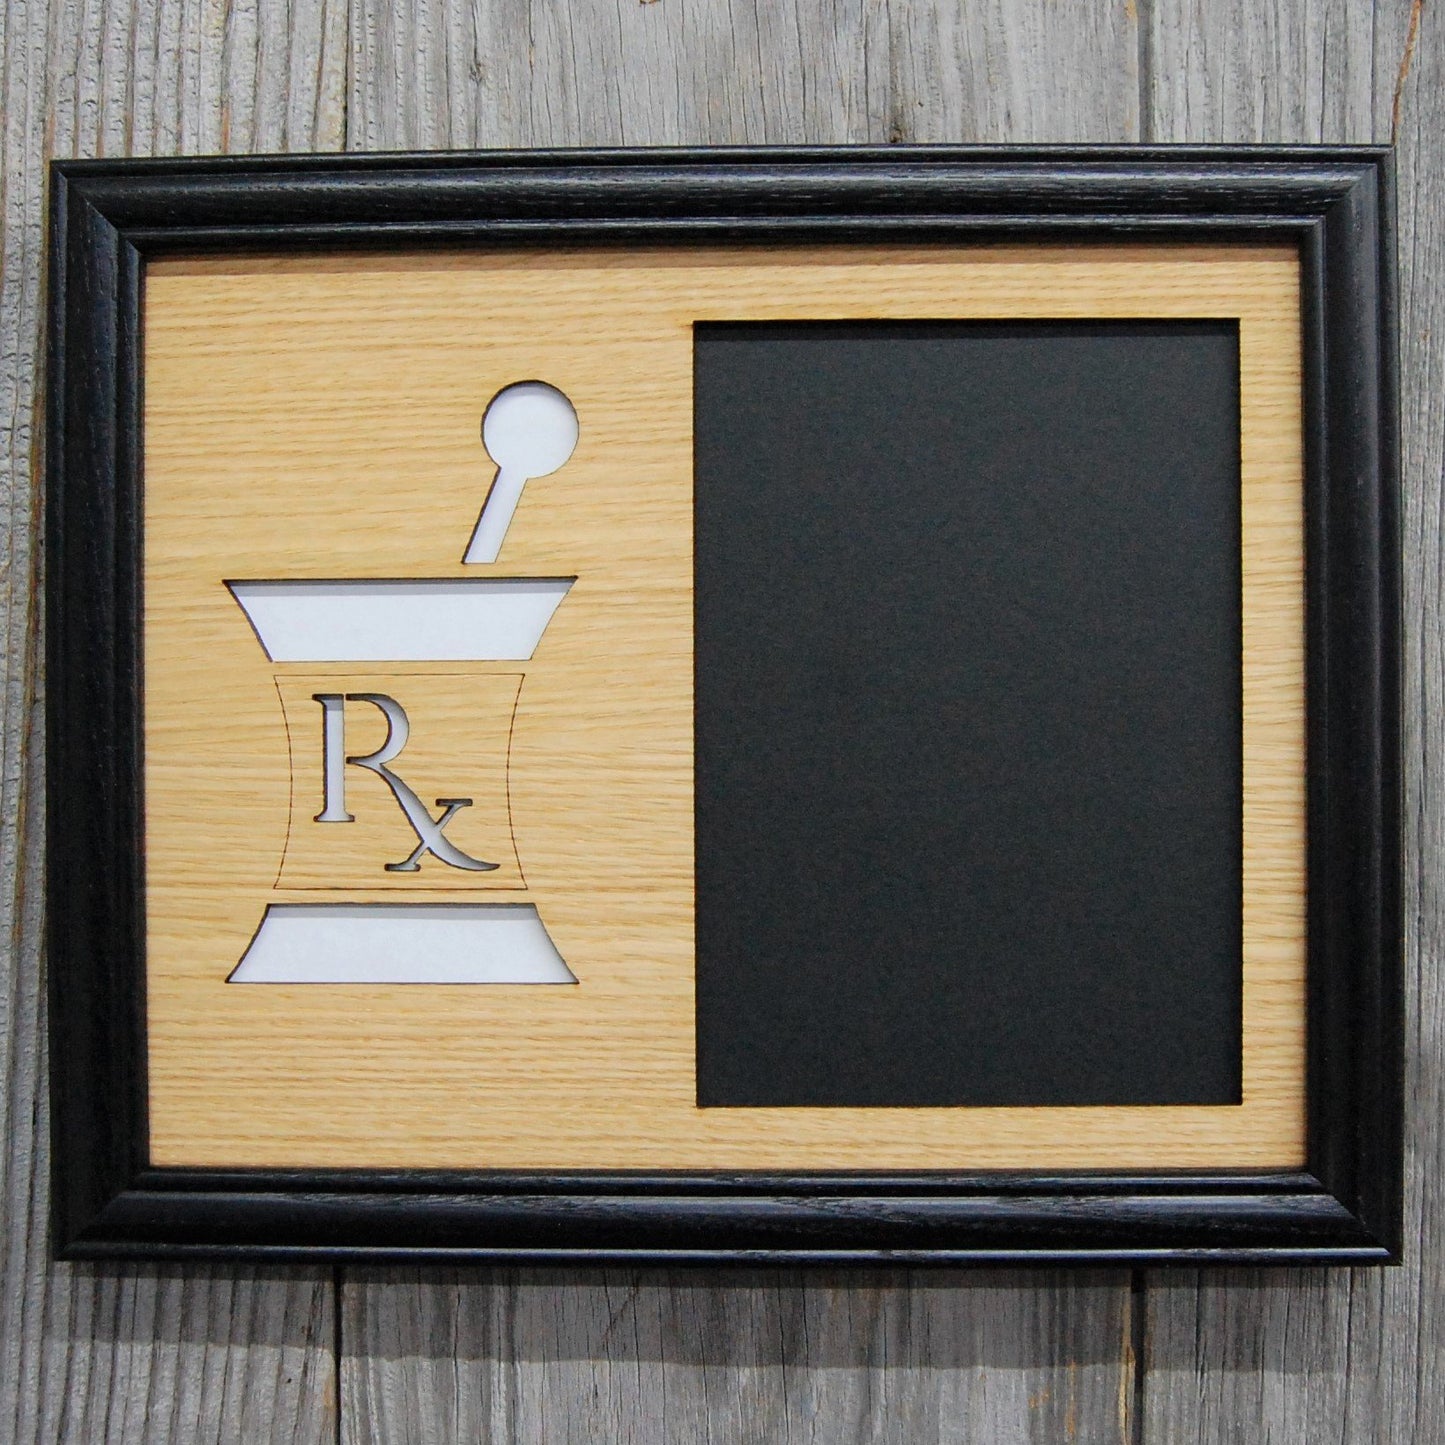 Pharmacist Picture Frame - 8x10 Frame Hold 5x7 and 3x4 Photos